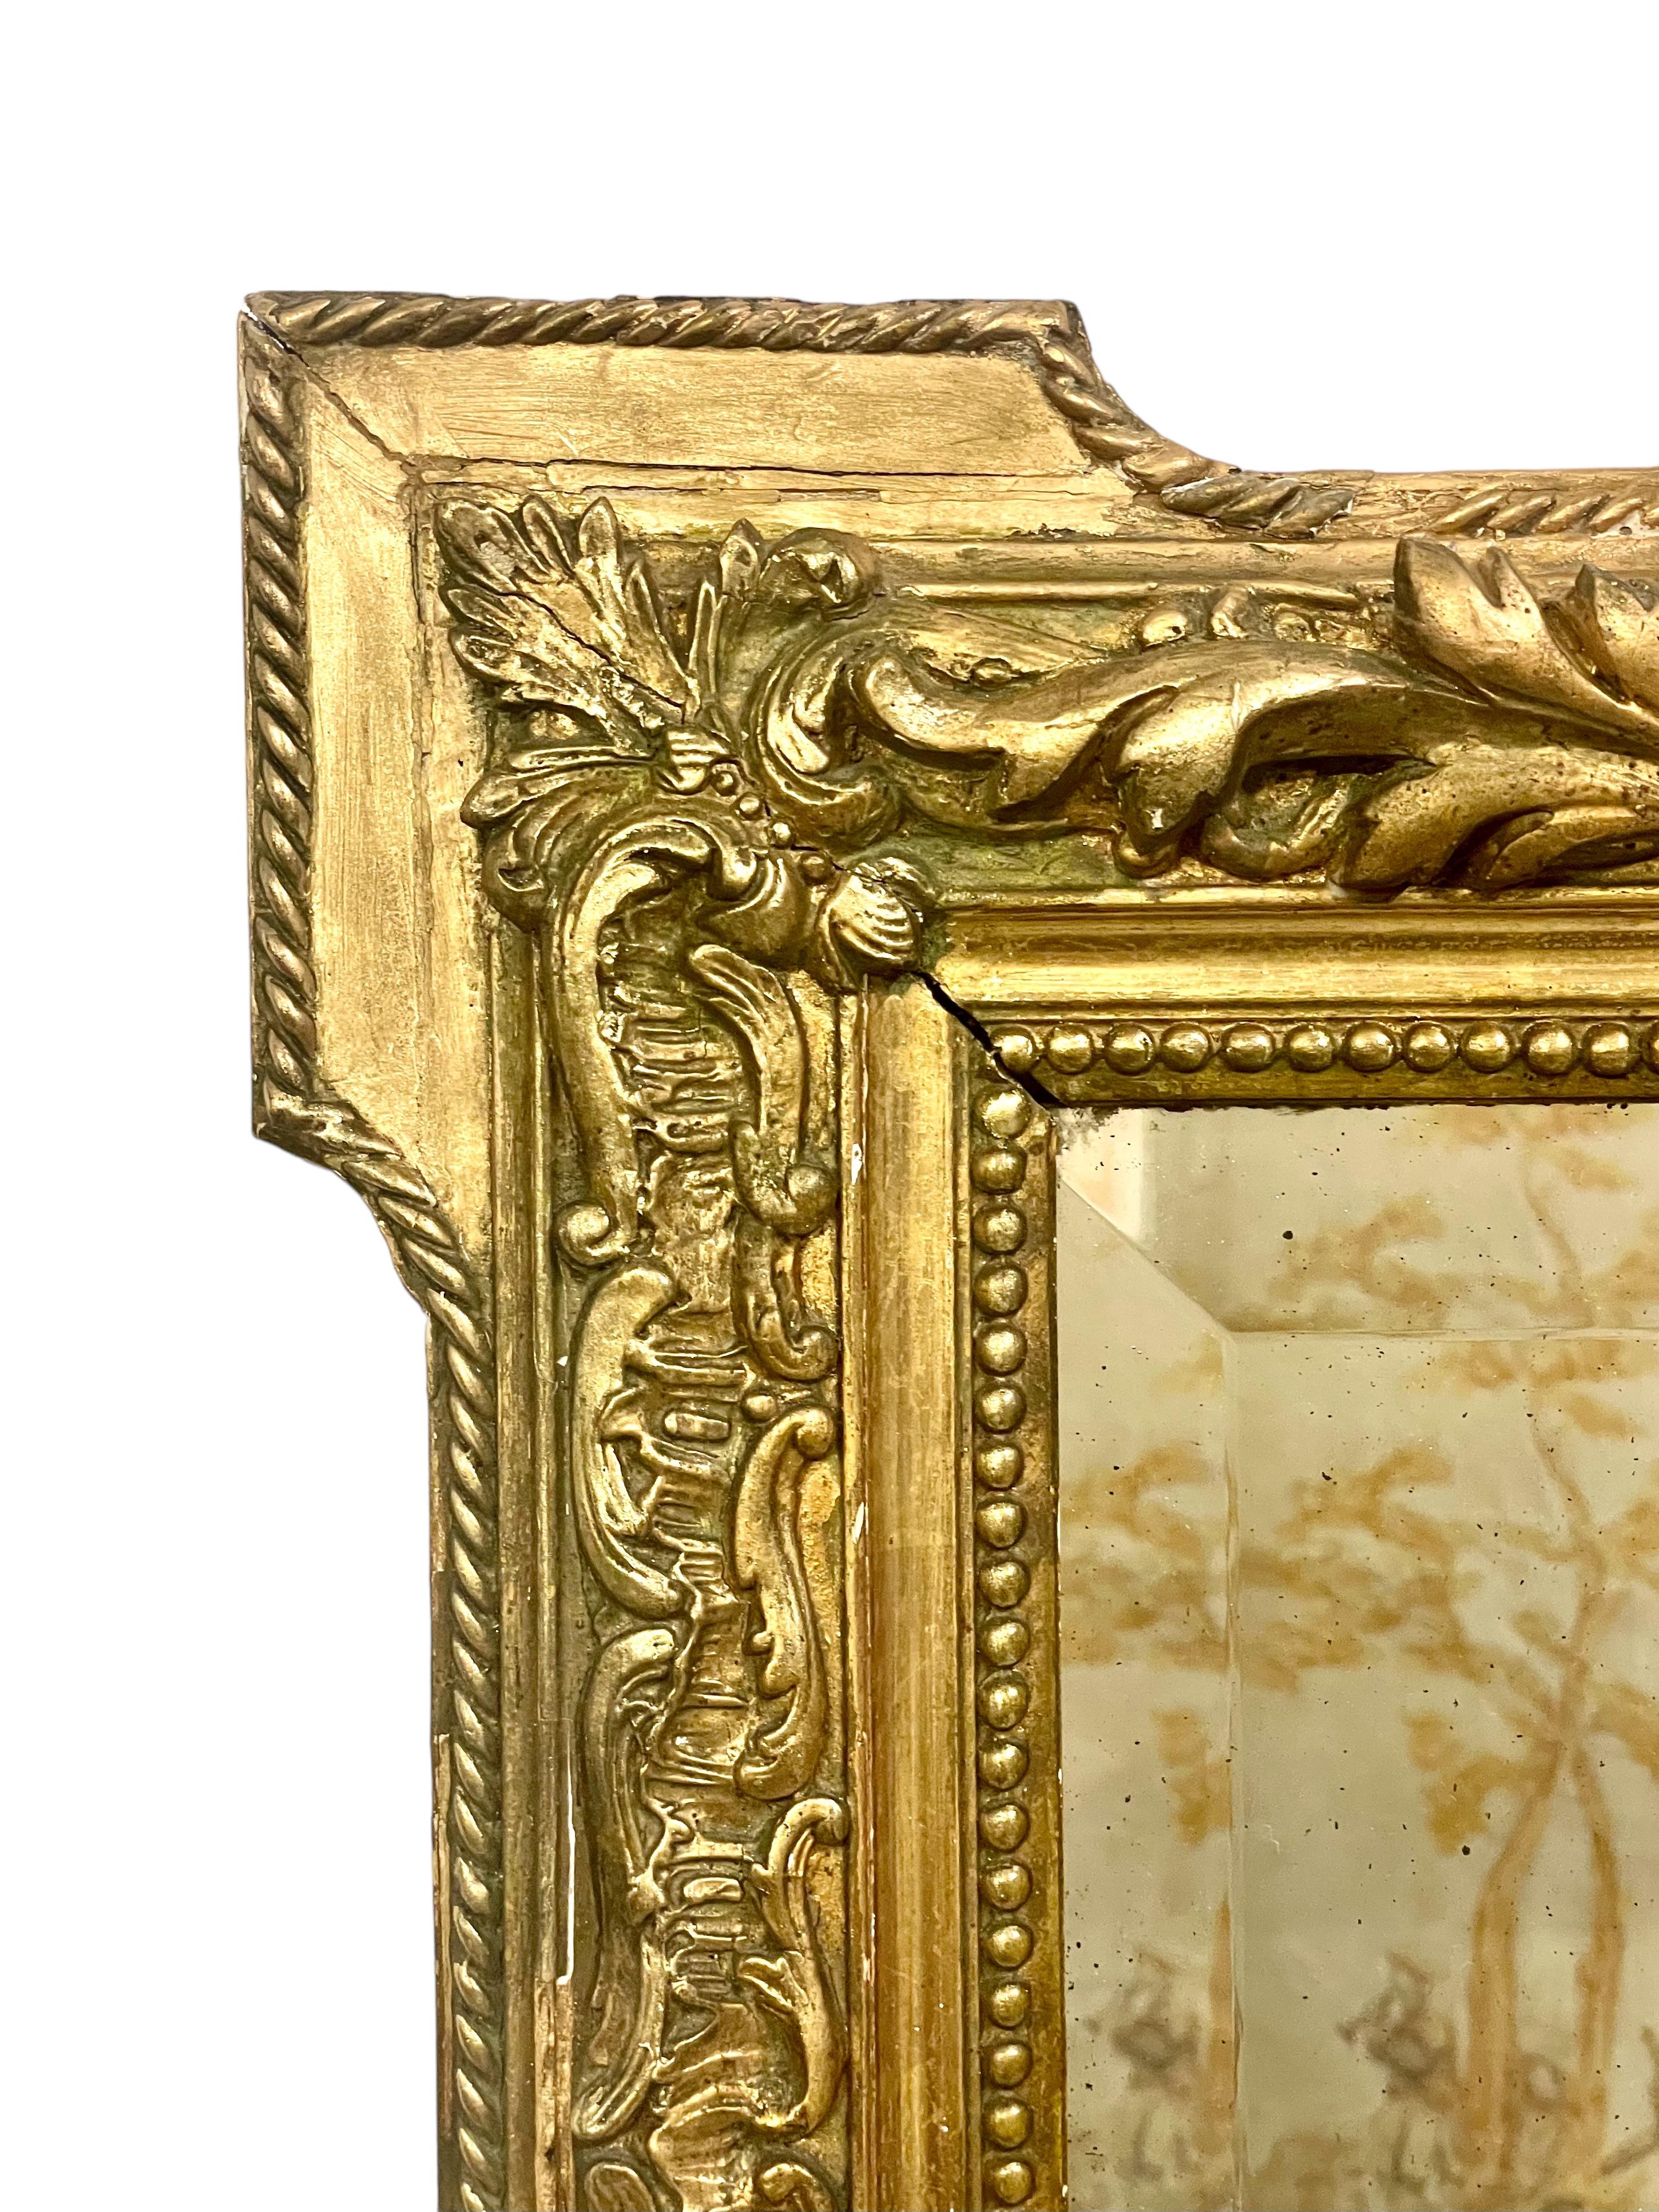 A tall and impressive 19th century Napoleon III rectangular mantle mirror in a wood and gilt stucco frame, surmounted by an imposing pediment of cherubs and dolphins flanking an oval medallion. The frame, with its continuous floral haut-relief